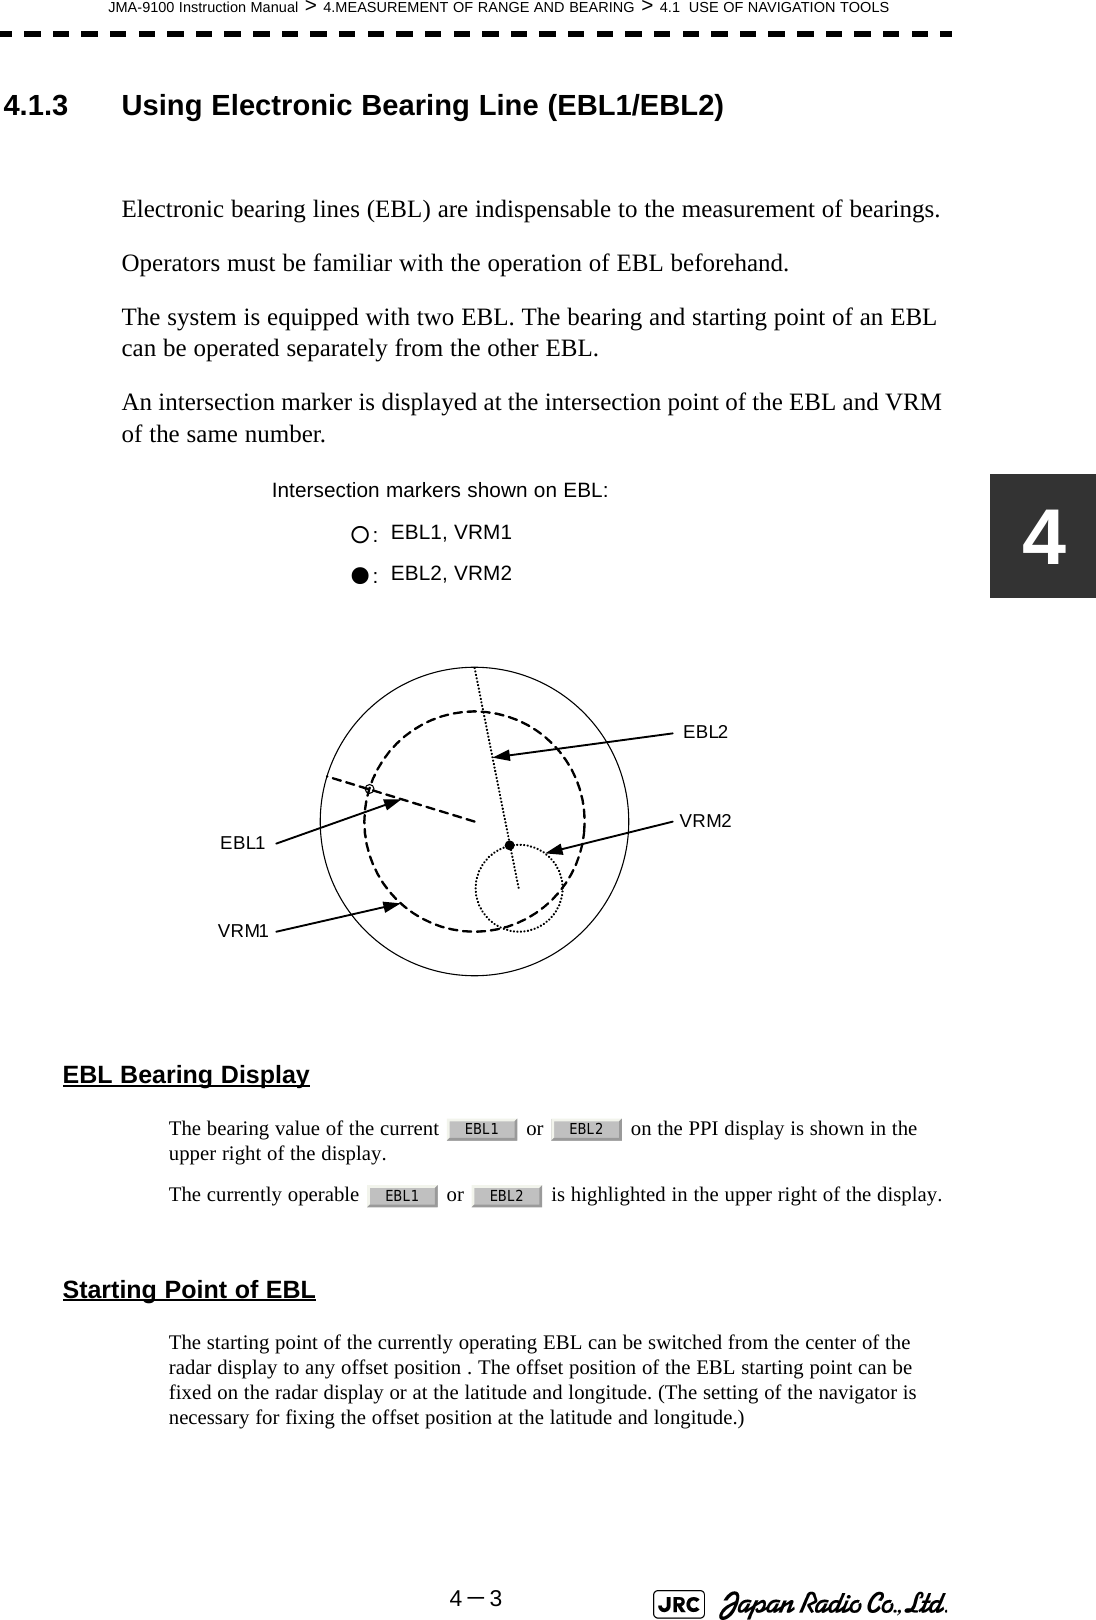 JMA-9100 Instruction Manual &gt; 4.MEASUREMENT OF RANGE AND BEARING &gt; 4.1  USE OF NAVIGATION TOOLS4－344.1.3 Using Electronic Bearing Line (EBL1/EBL2)Electronic bearing lines (EBL) are indispensable to the measurement of bearings.Operators must be familiar with the operation of EBL beforehand.The system is equipped with two EBL. The bearing and starting point of an EBL can be operated separately from the other EBL.An intersection marker is displayed at the intersection point of the EBL and VRM of the same number.EBL Bearing DisplayThe bearing value of the current   or   on the PPI display is shown in the upper right of the display. The currently operable   or   is highlighted in the upper right of the display.Starting Point of EBLThe starting point of the currently operating EBL can be switched from the center of the radar display to any offset position . The offset position of the EBL starting point can be fixed on the radar display or at the latitude and longitude. (The setting of the navigator is necessary for fixing the offset position at the latitude and longitude.)Intersection markers shown on EBL:○:EBL1, VRM1●:EBL2, VRM2VRM2EBL2VRM1EBL1EBL1 EBL2EBL1 EBL2